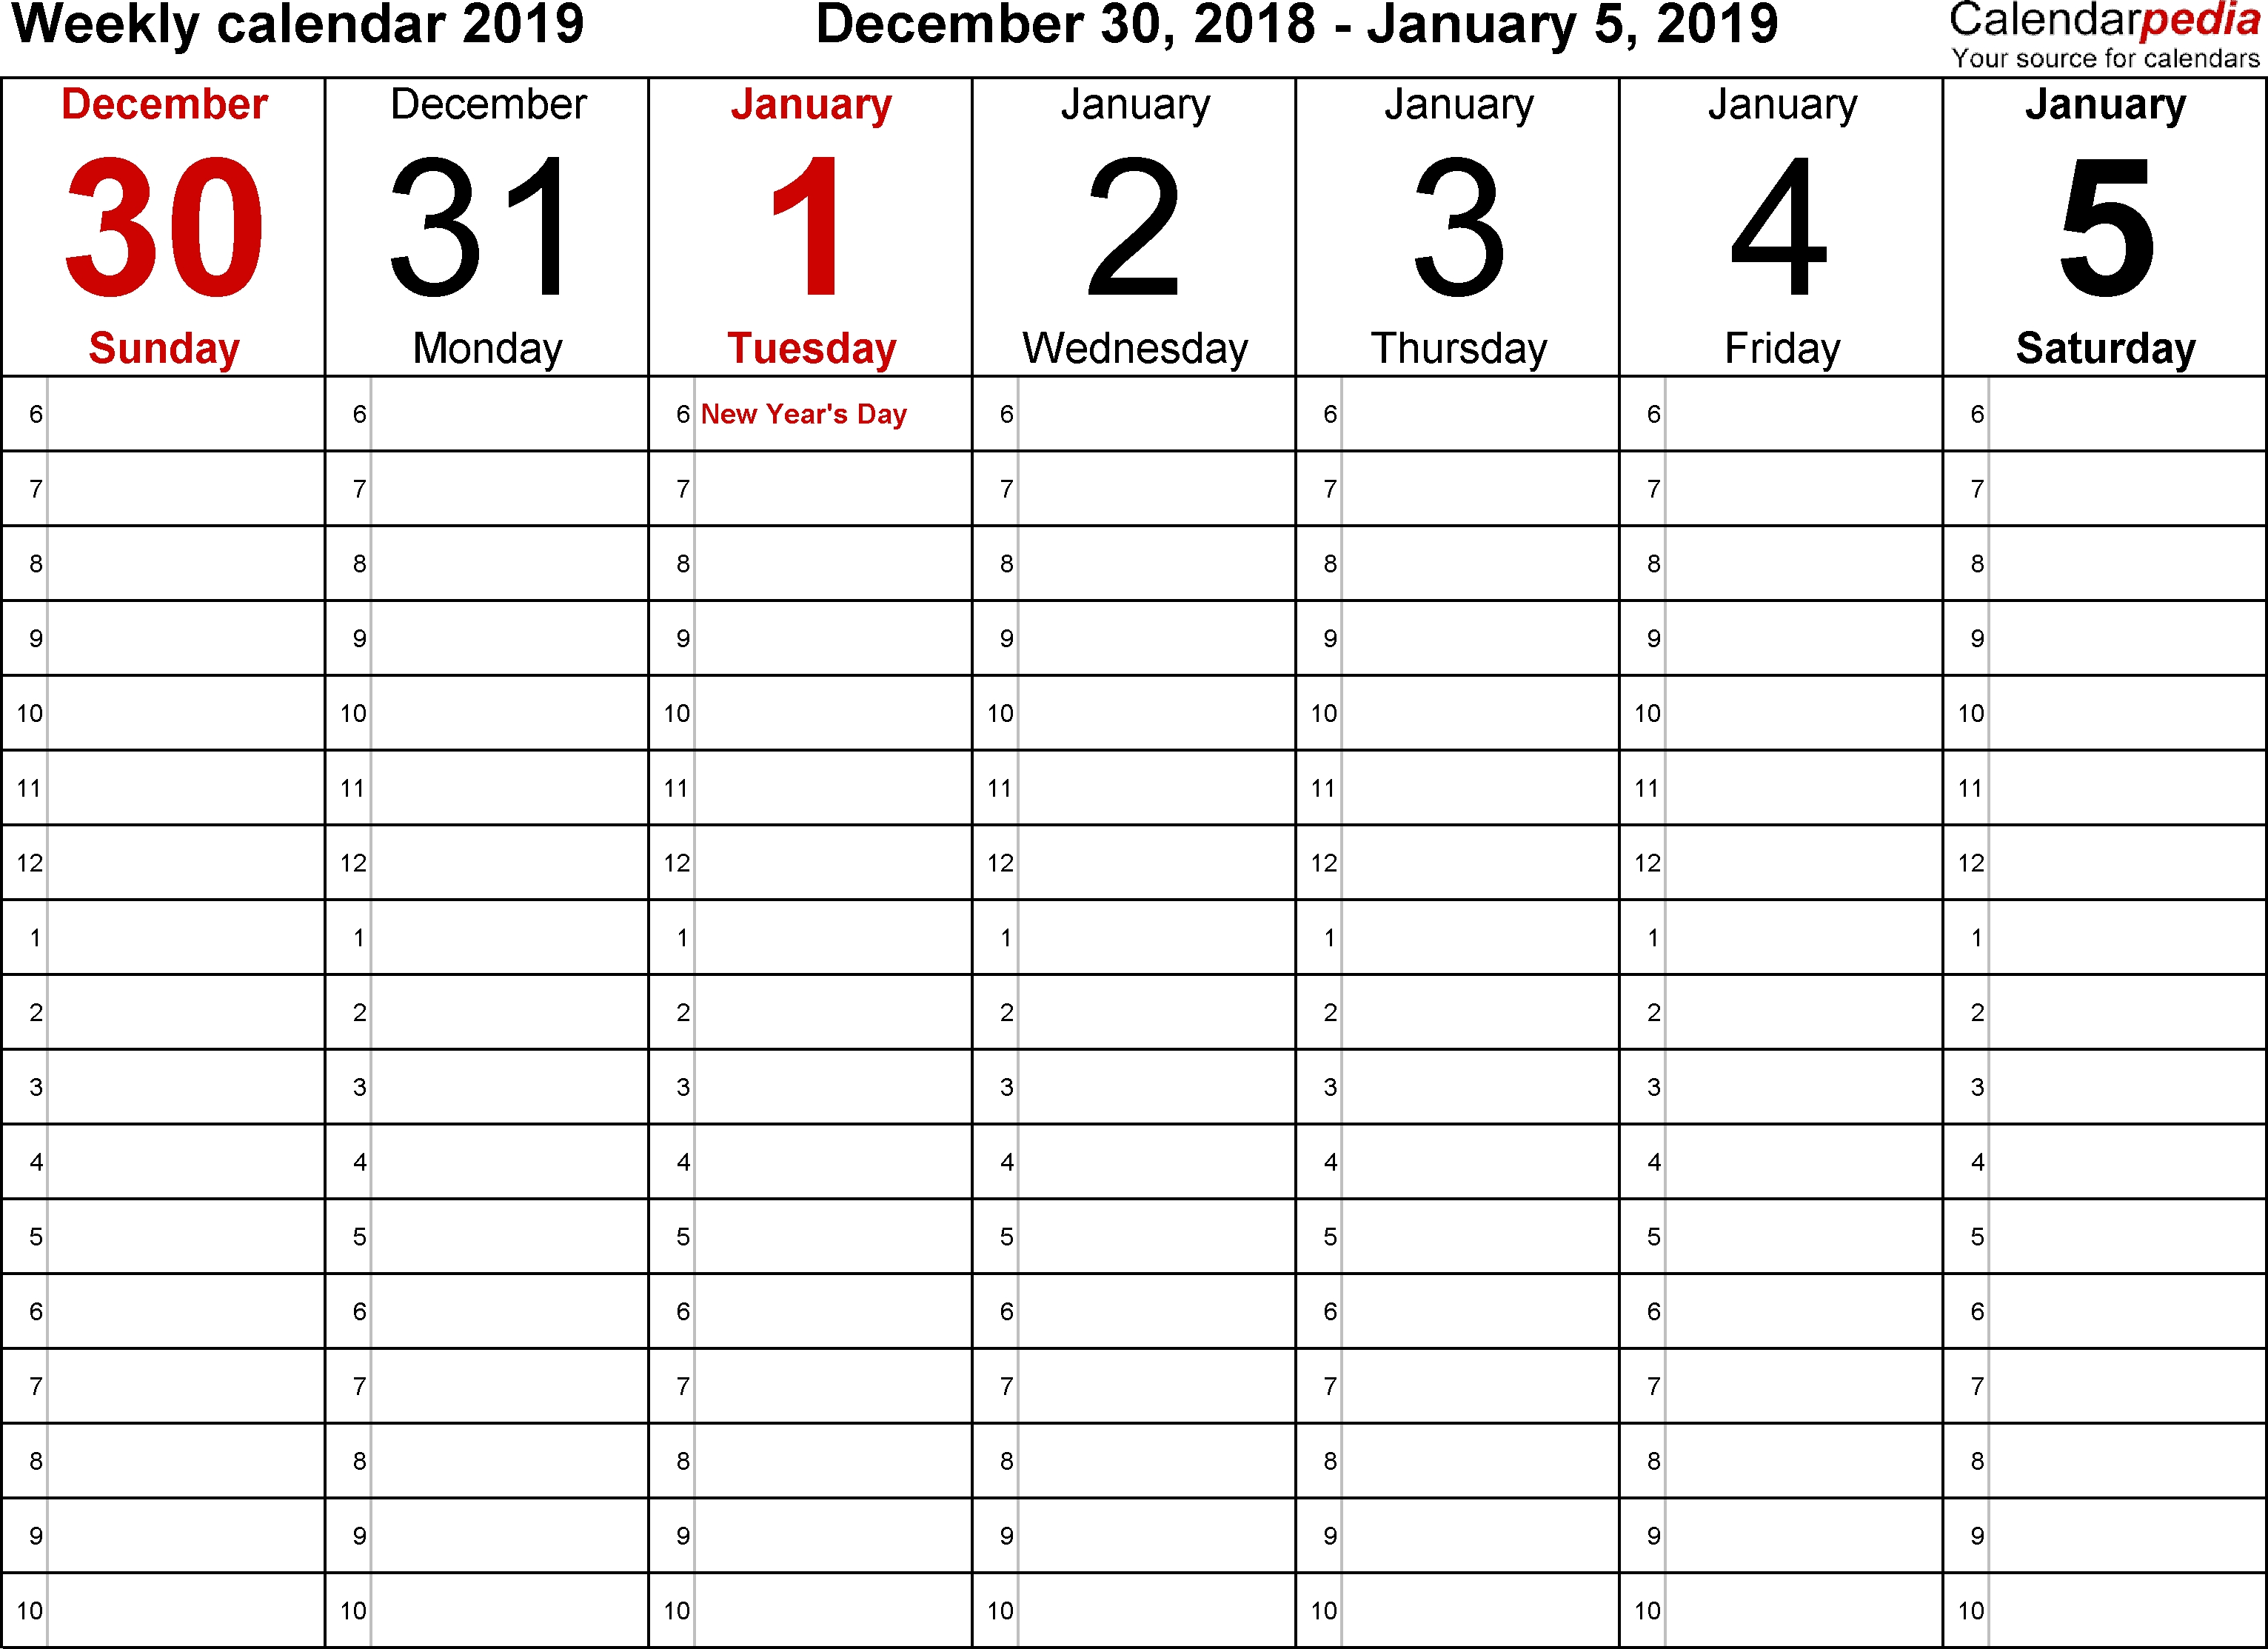 Weekly Calendar 2019 For Word - 12 Free Printable Templates pertaining to Printable Blank Weekly Calendars Templates